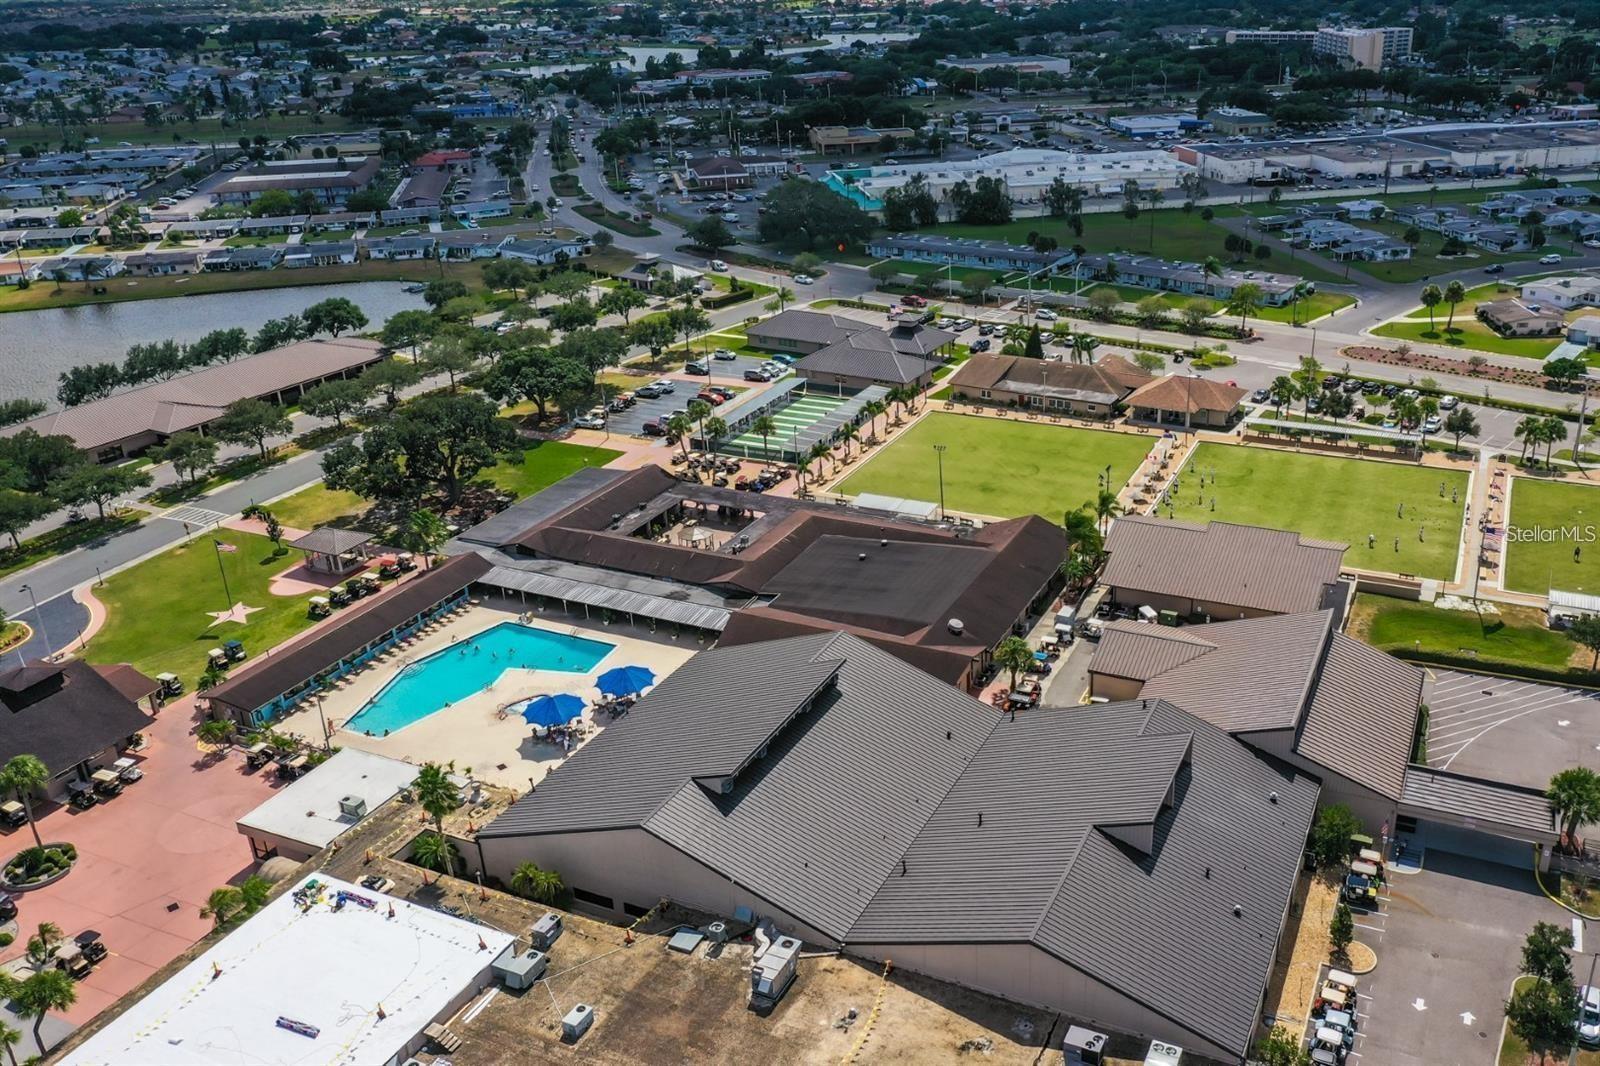 Aerial view of amenity center of Sun City Center